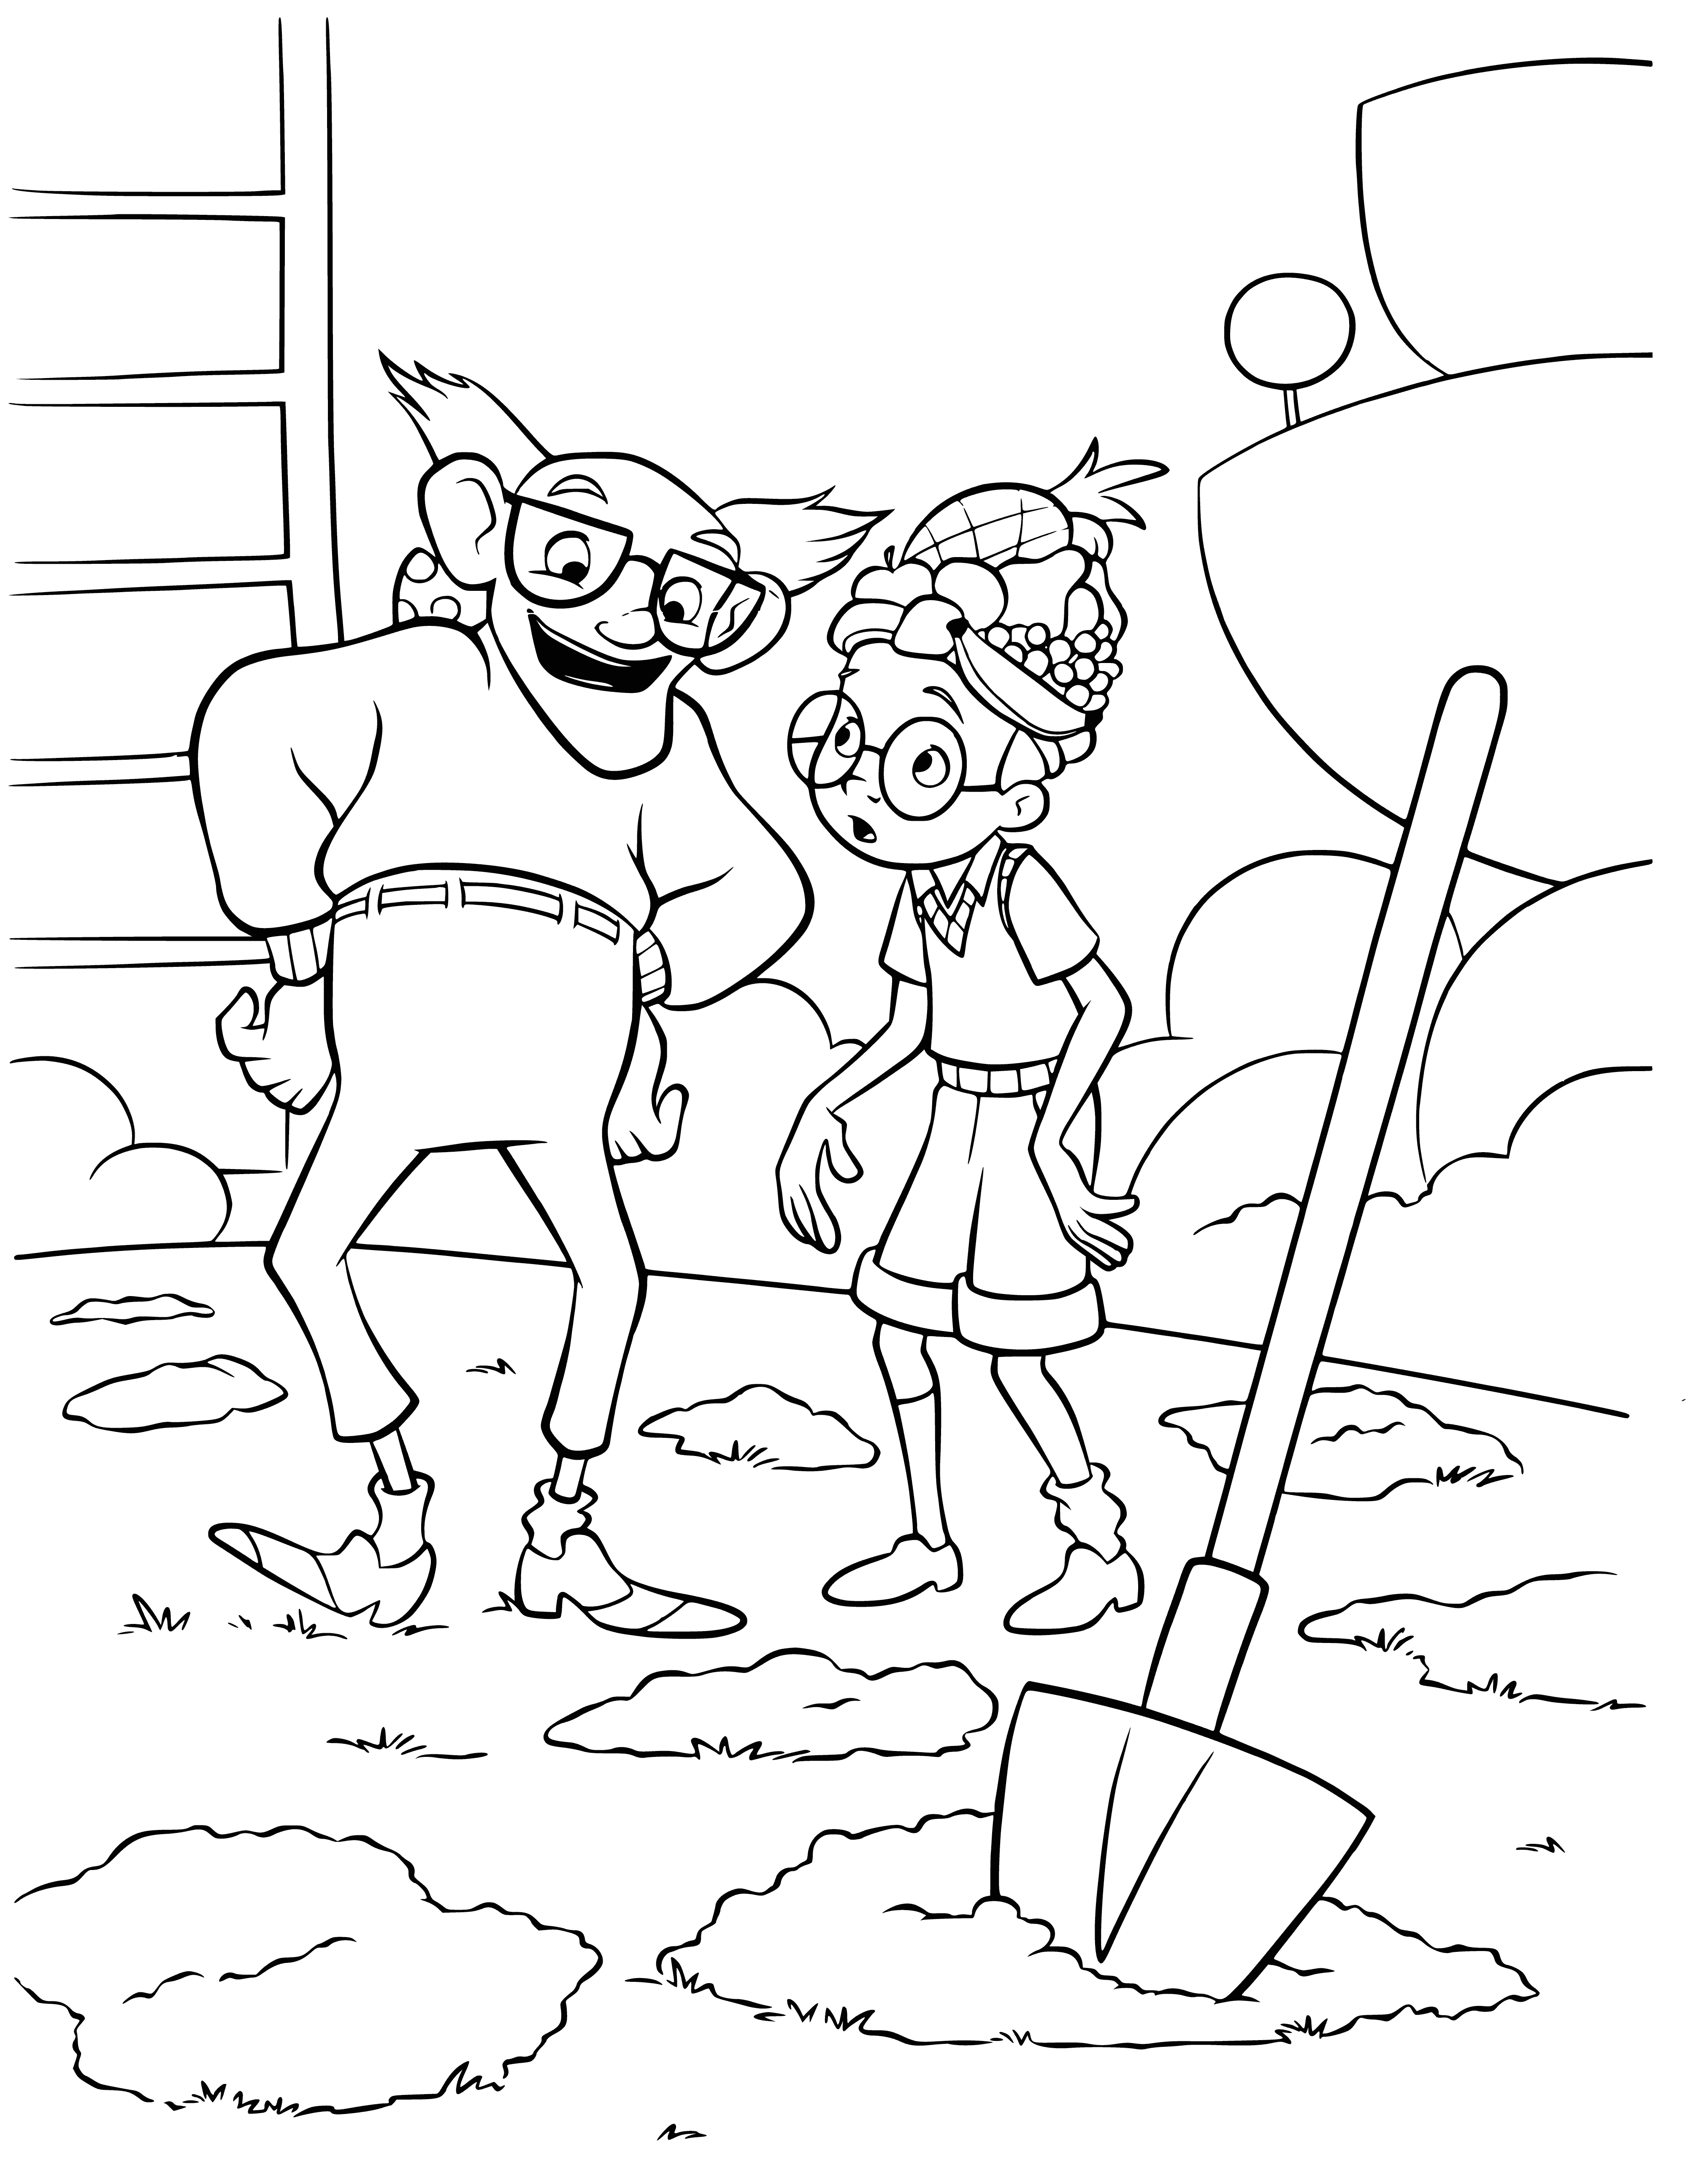 coloring page: Lewis and grandfather smile happily on park bench, him holding baseball in one hand.